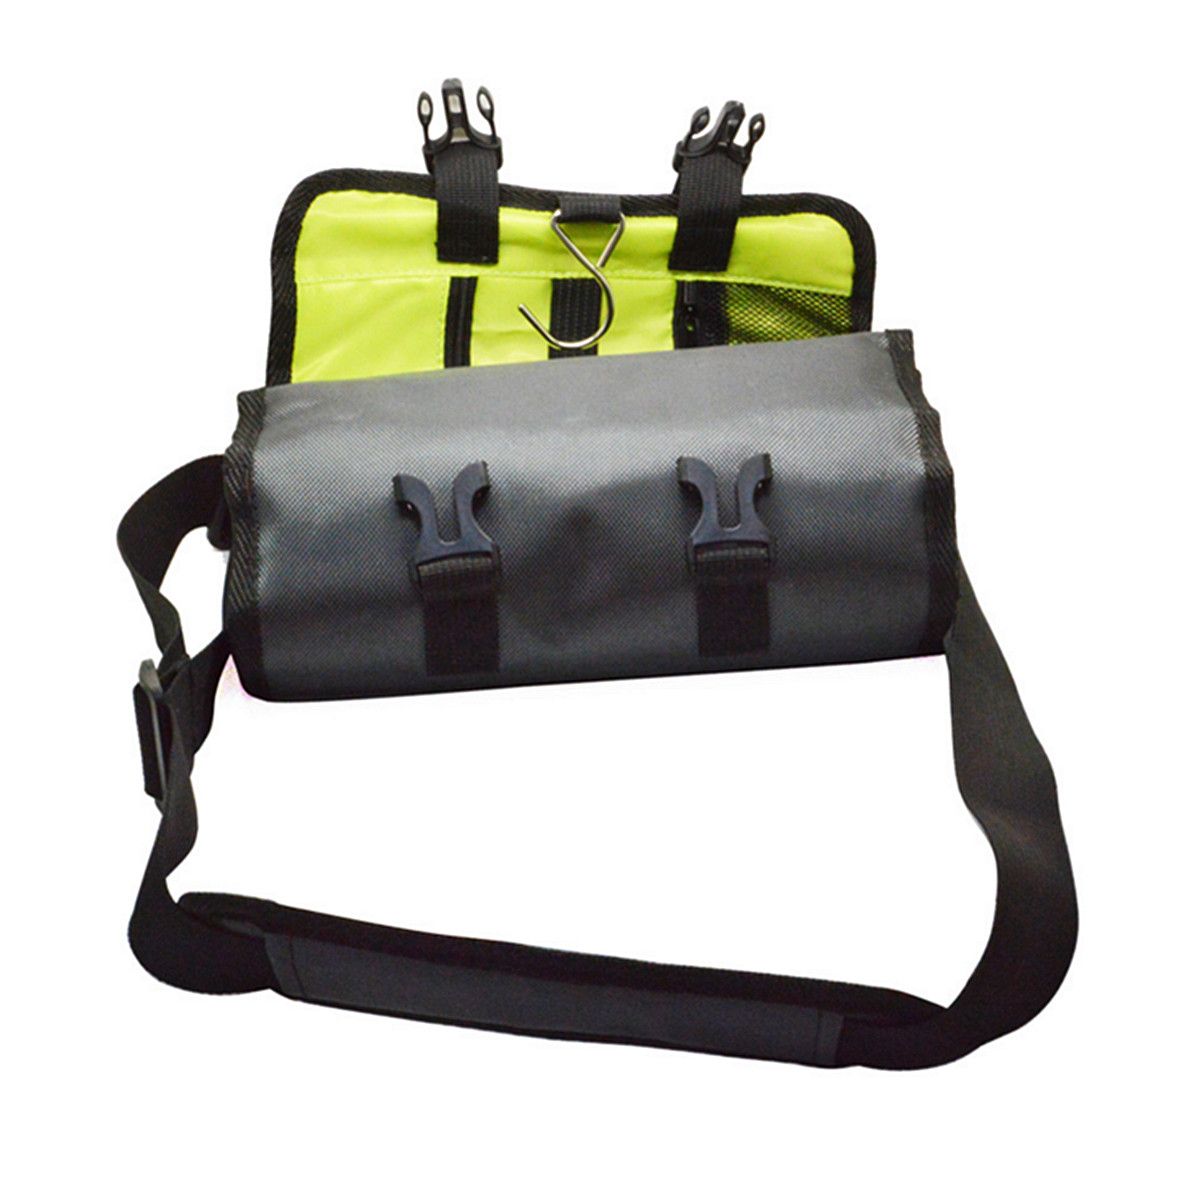 Waterproof-Camera-Bag-Storage-Case-Cover-Roll-Protector-for-Action-Sportscamera-1202189